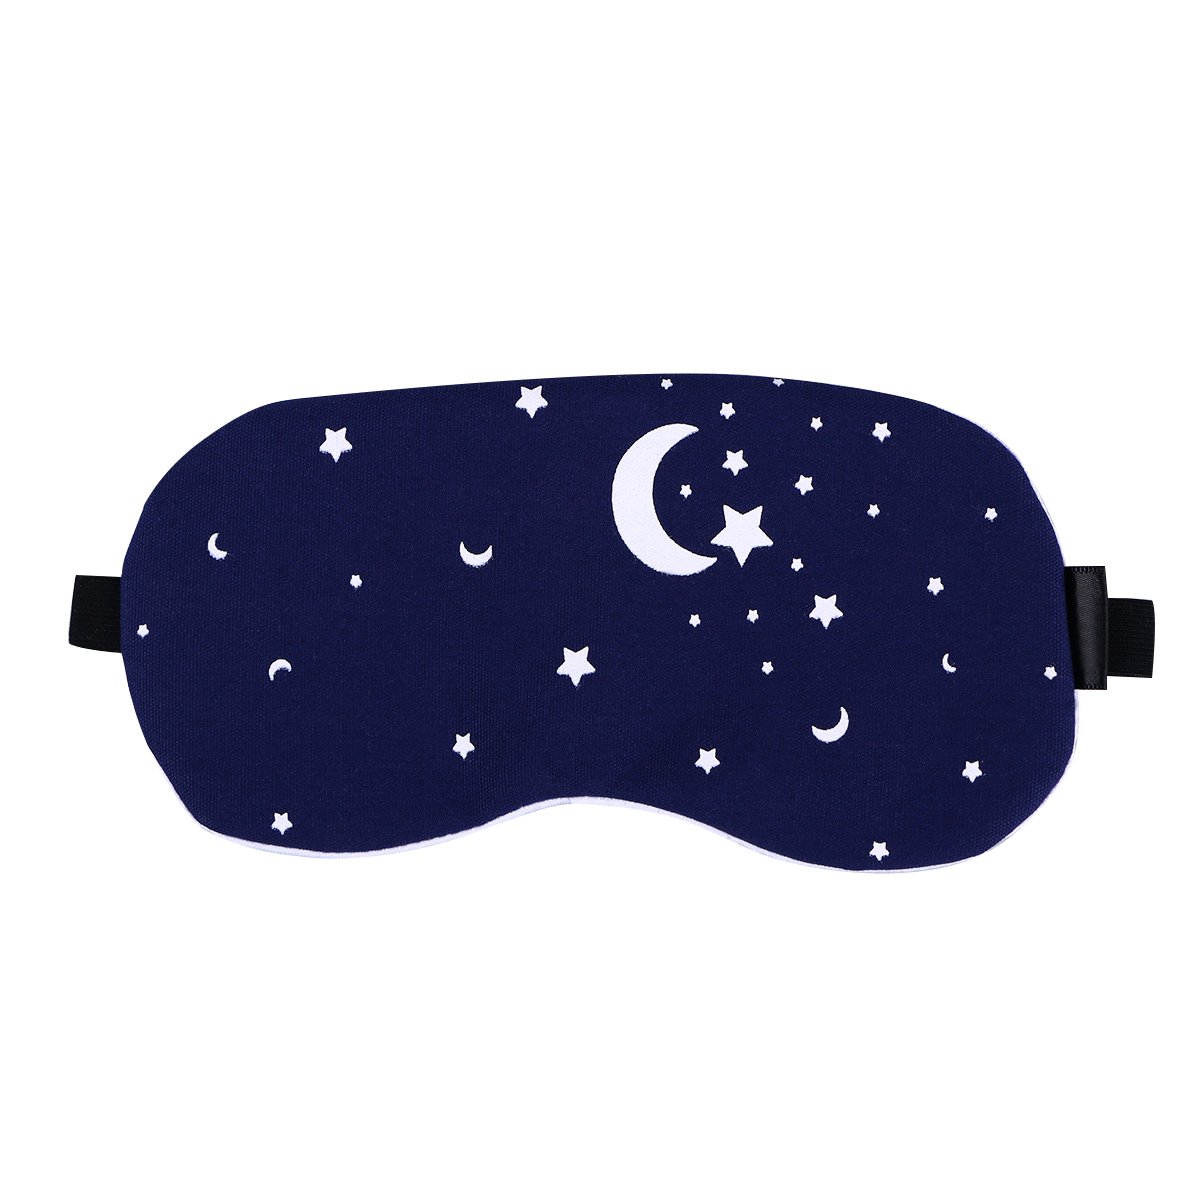 Image of a blue eye mask with a white star and moon pattern, with a clickable link to Amazon.